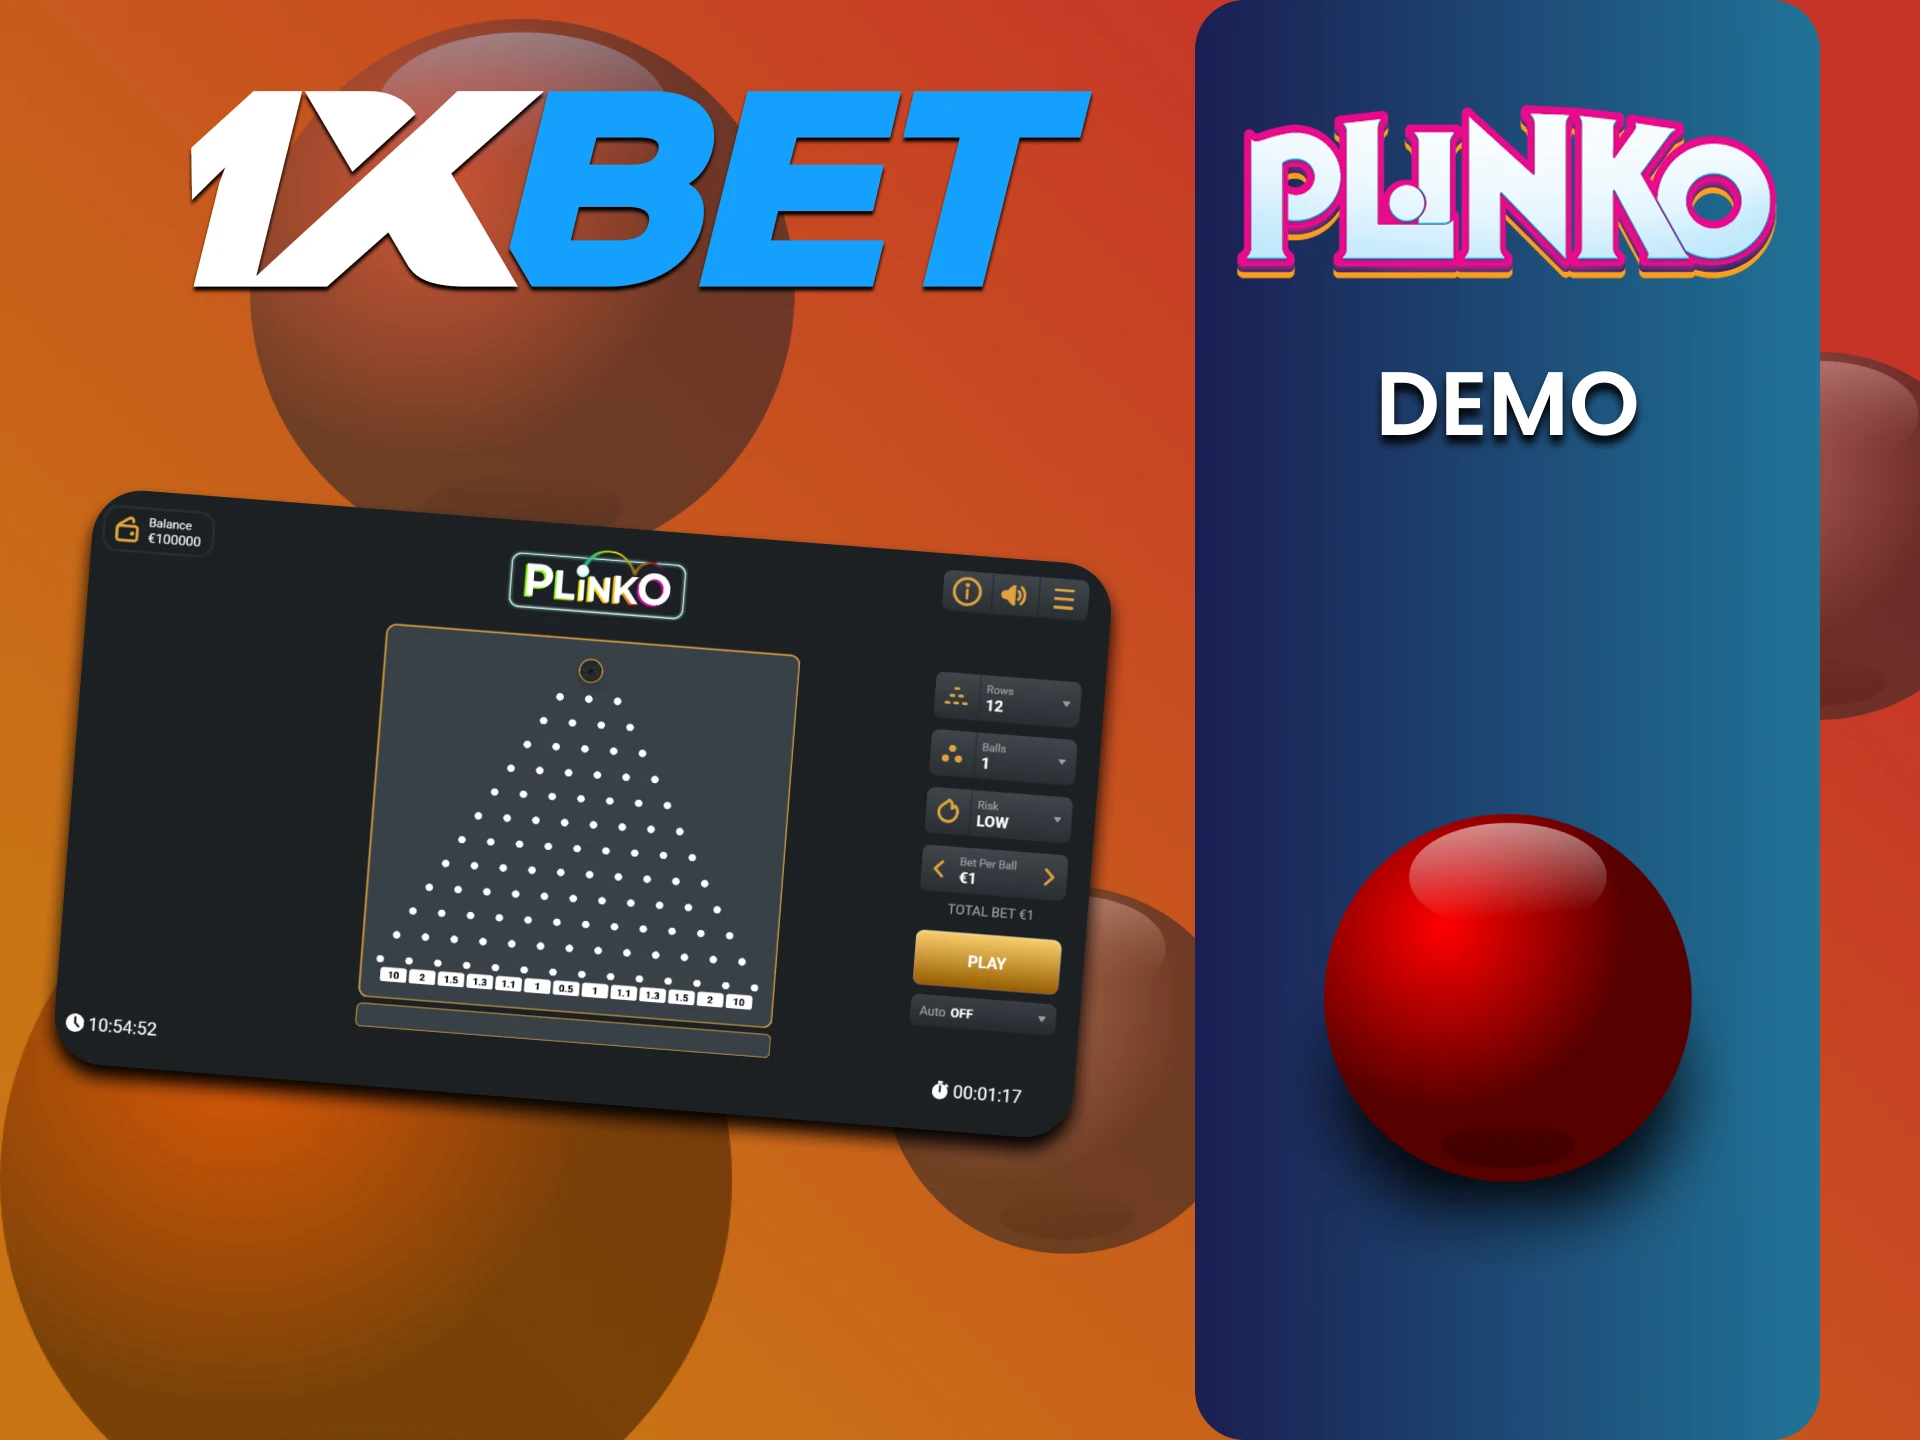 Practice in the demo version of the Plinko game on 1xbet.